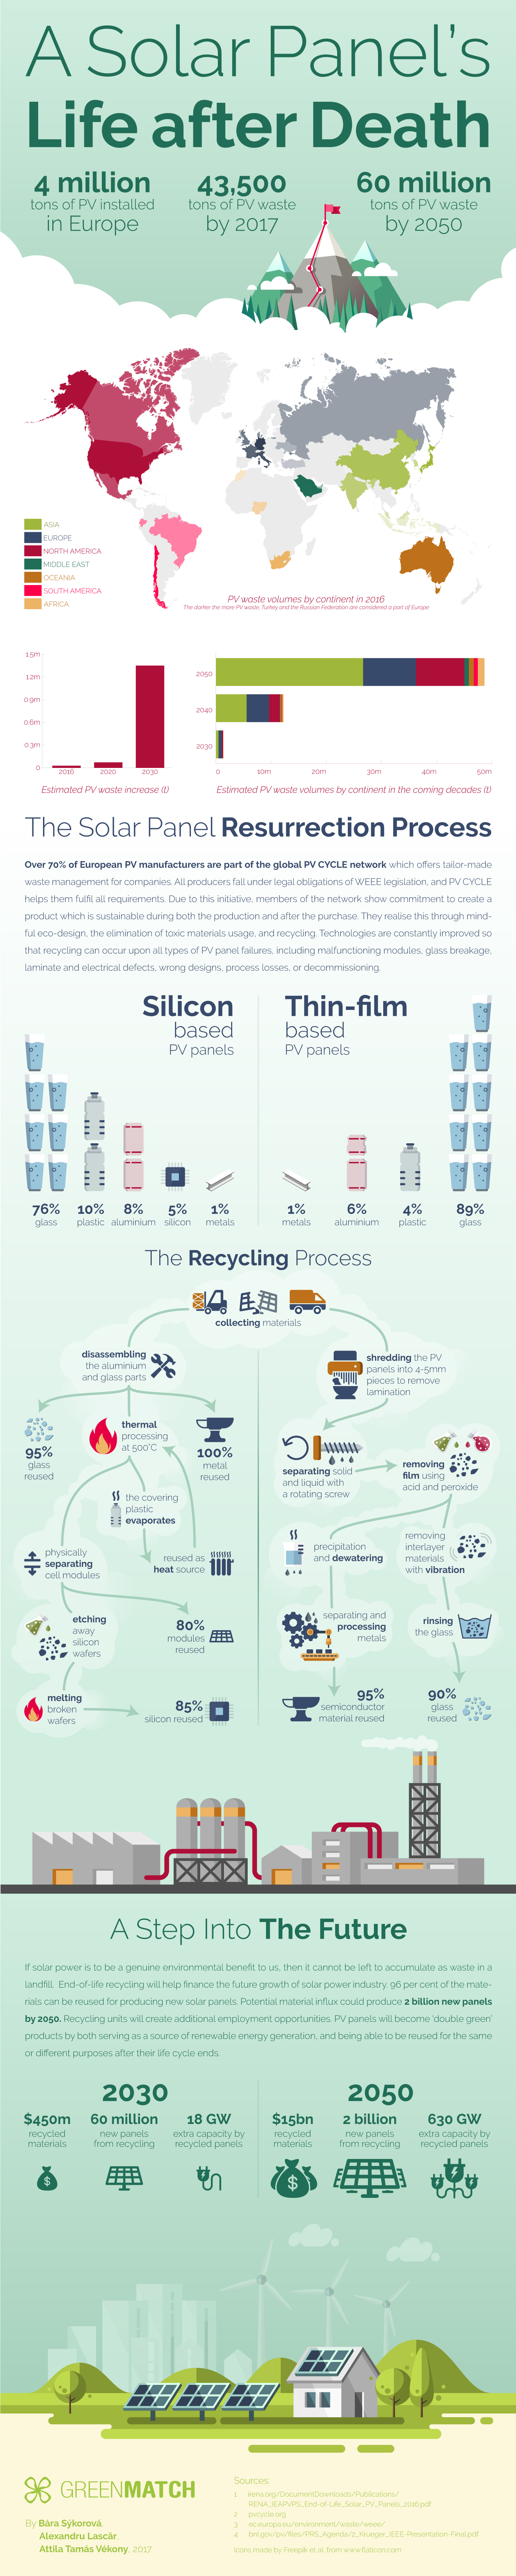 Solar panel recycling graphic